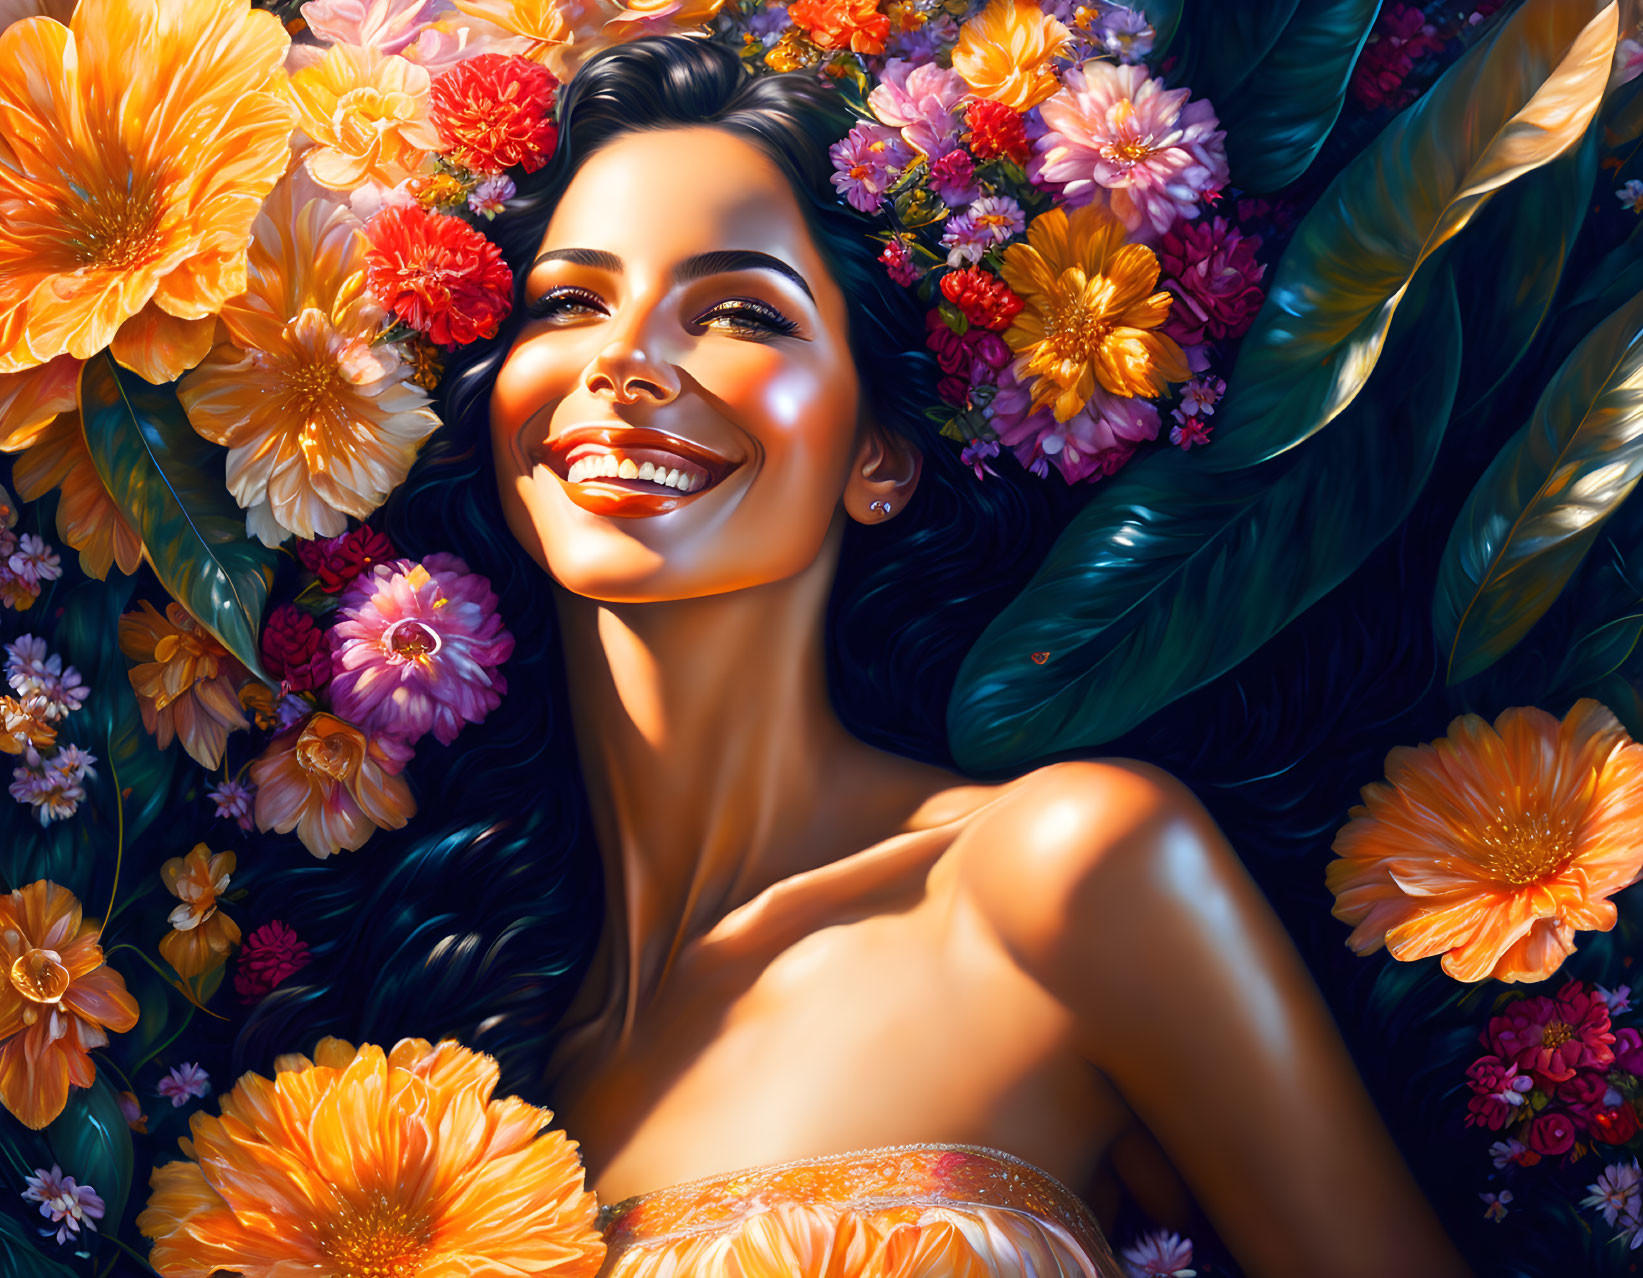 Beautiful Woman with a smile appears from flowers